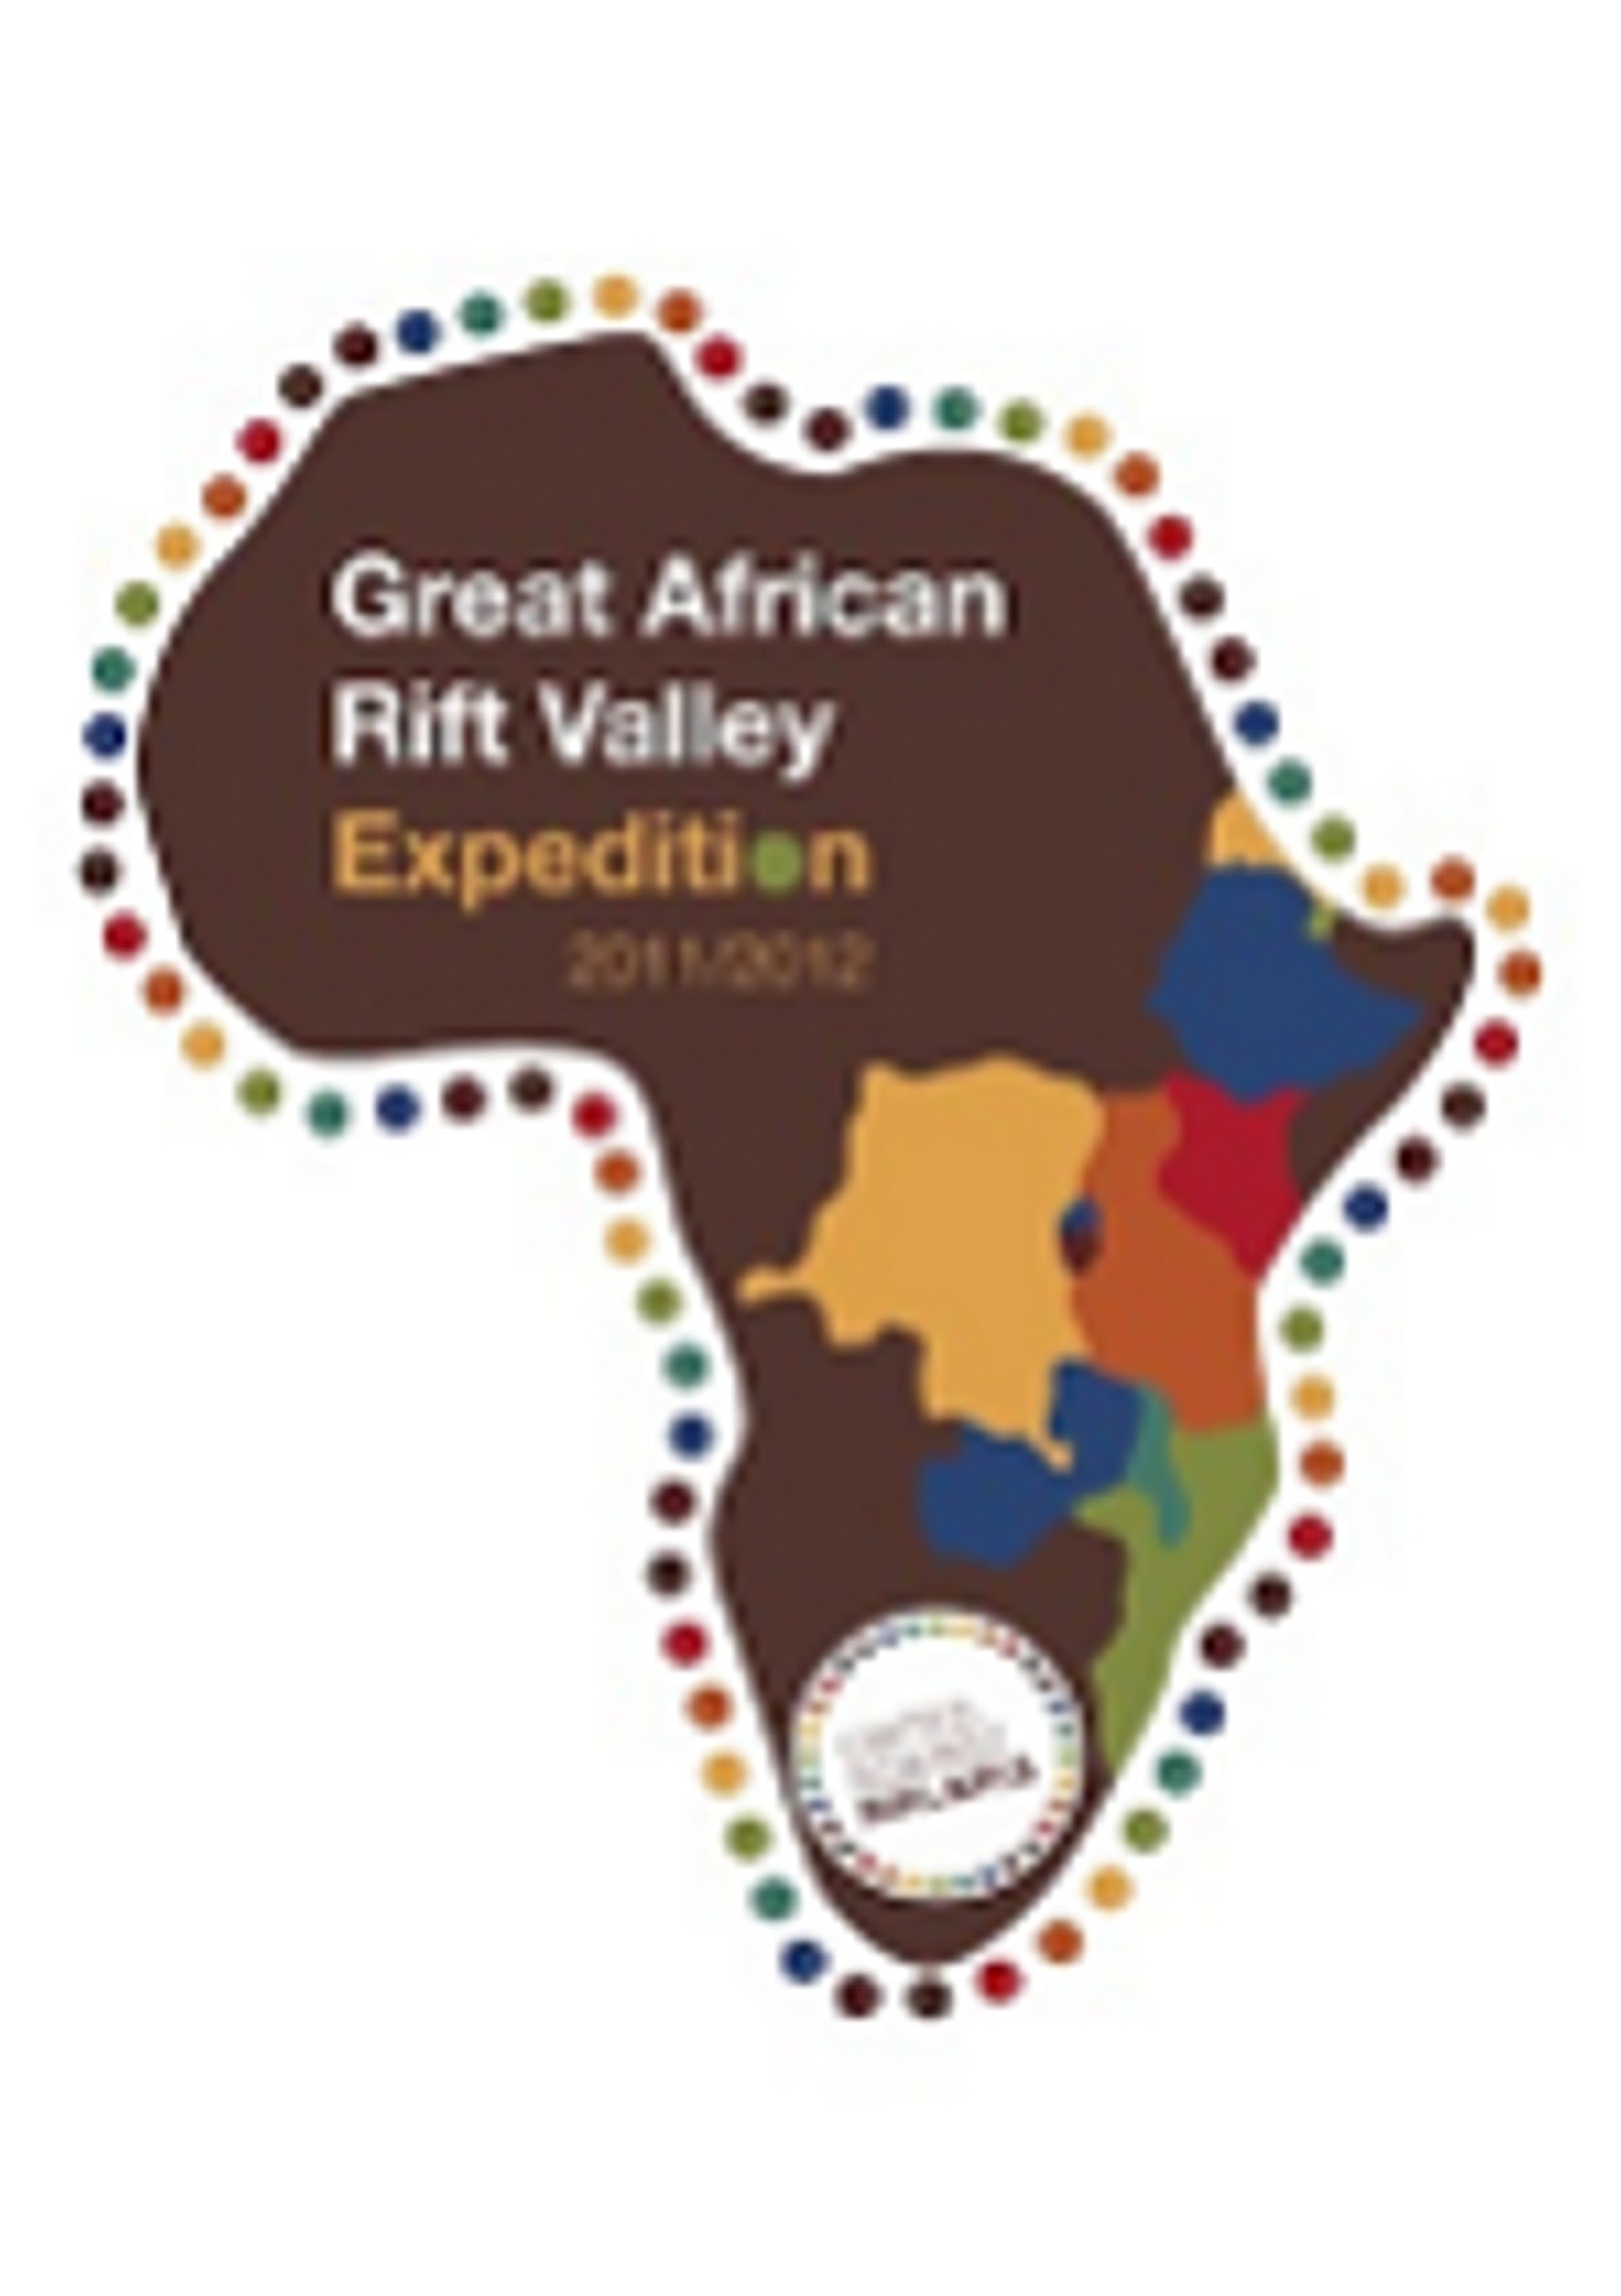 GREAT AFRICAN RIFT VALLEY EXPEDITION